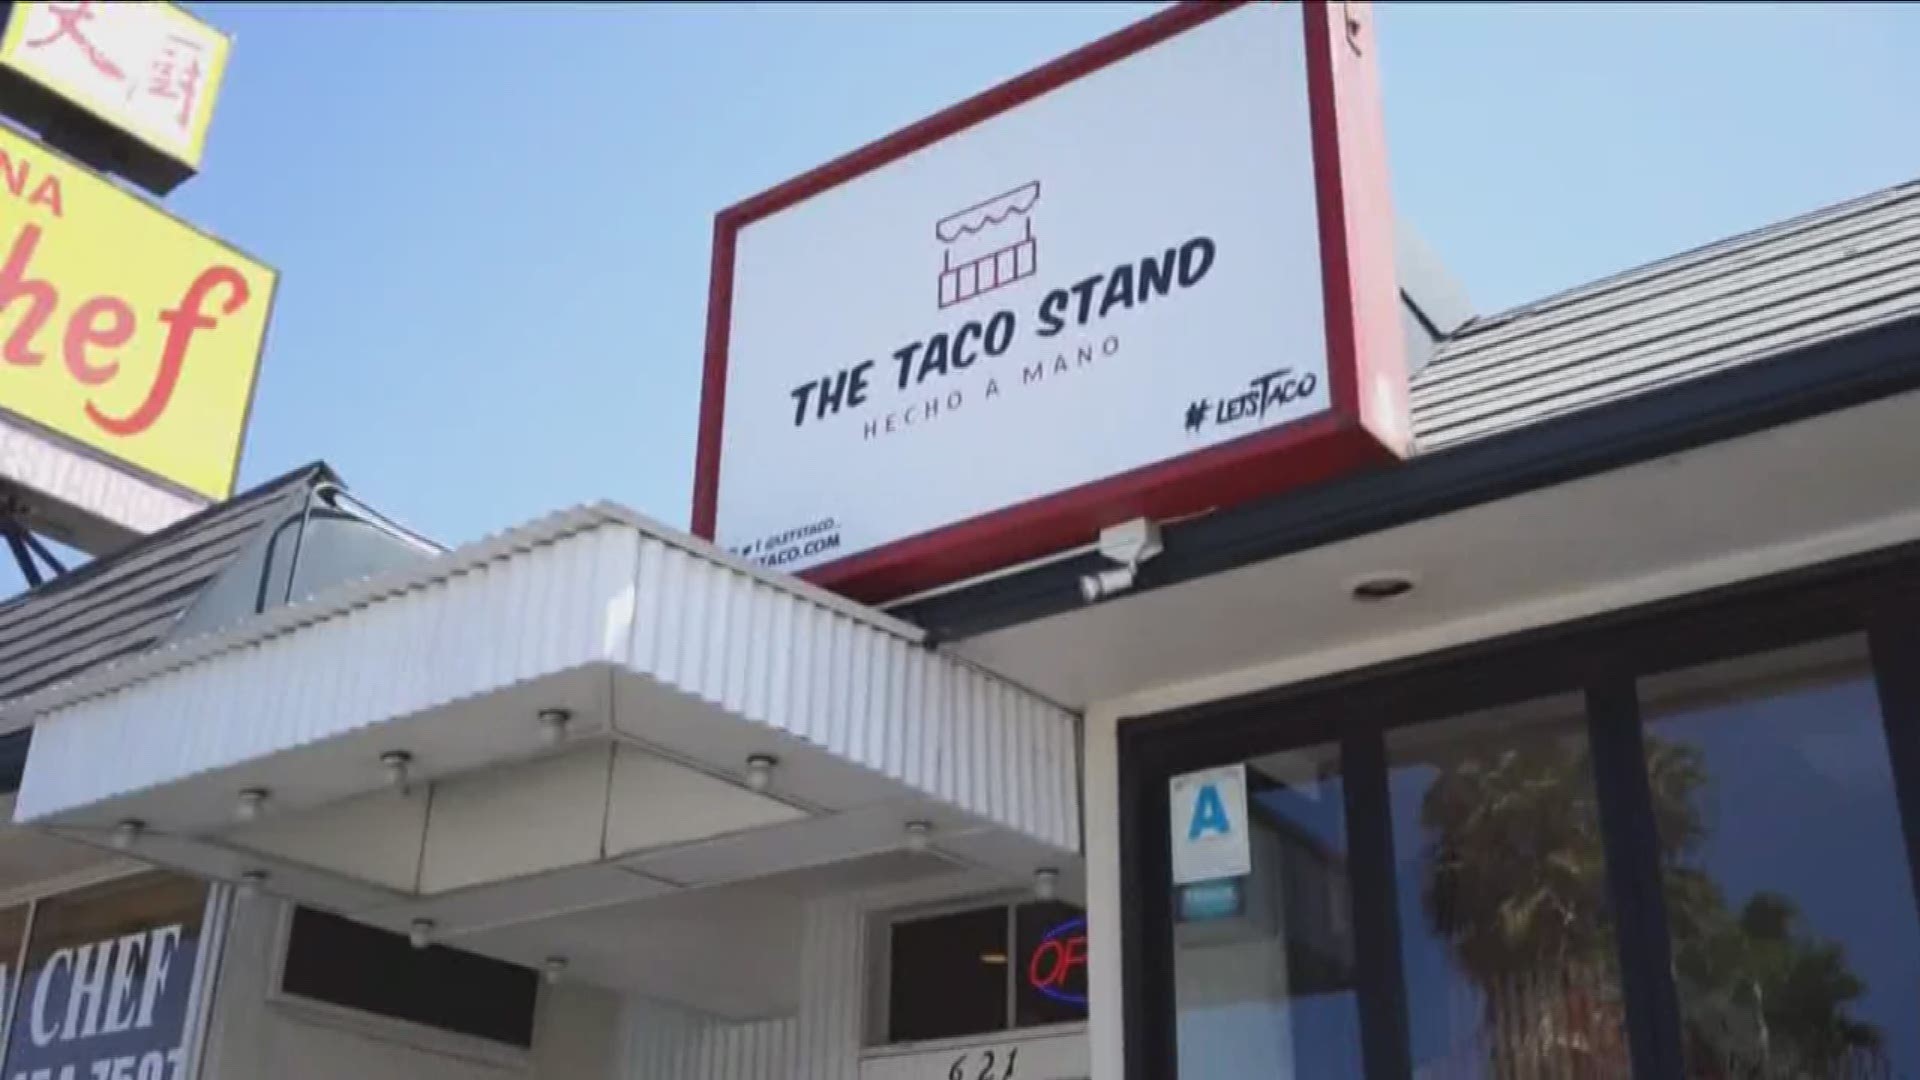 Jenny talked with Mike Roels from Taco Stand about how they are continuing to serve customers during the coronavirus outbreak.